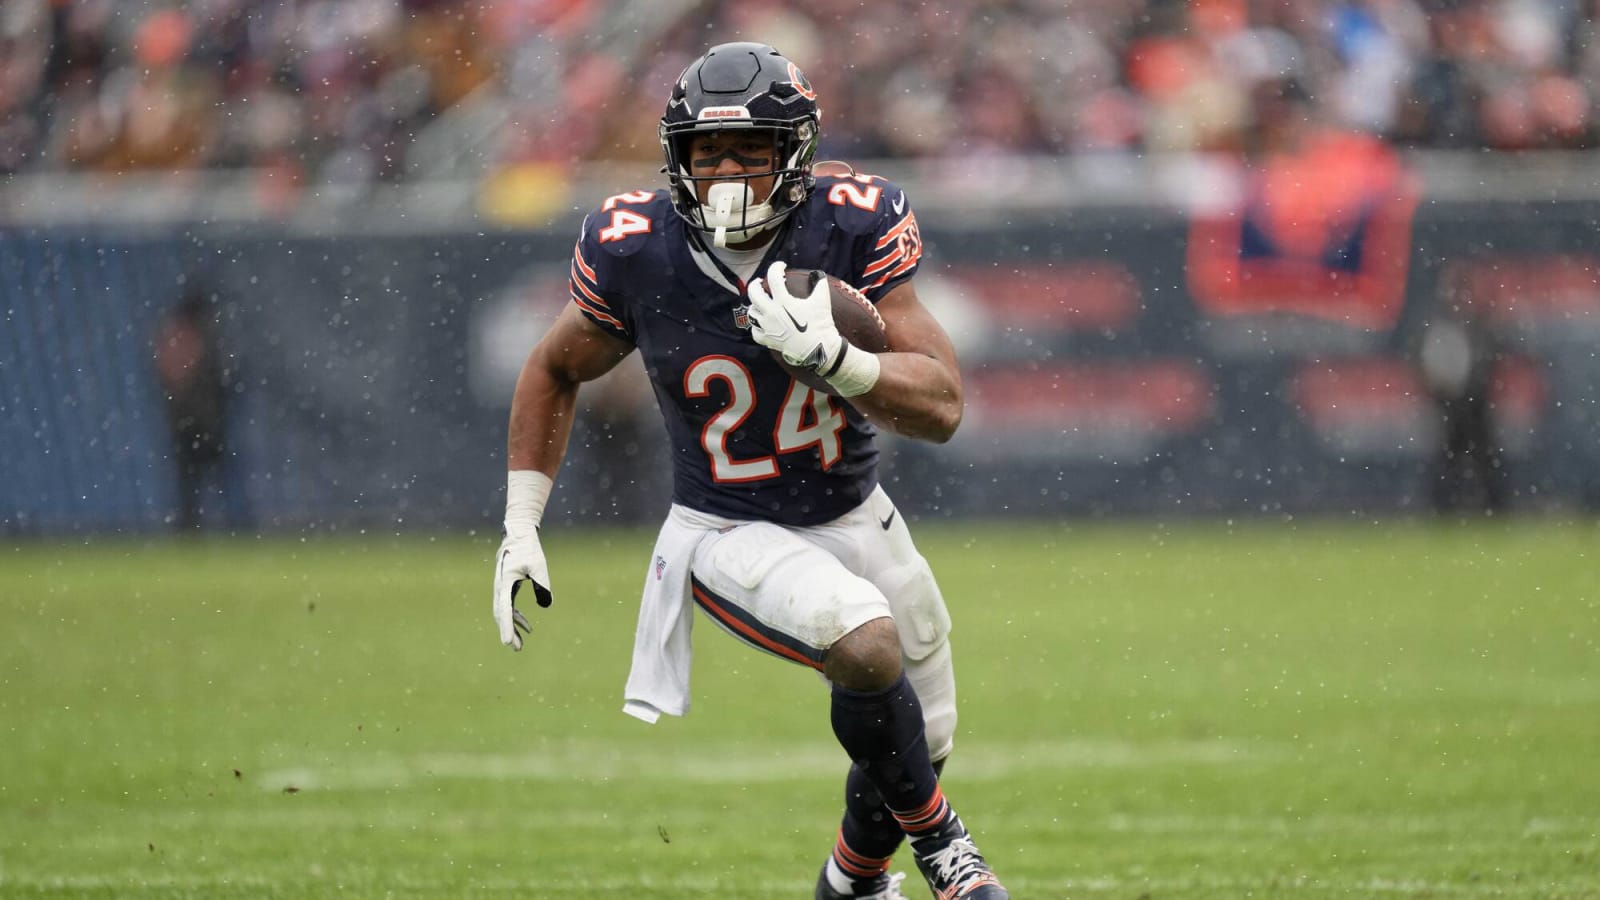 NFL writer suggests Cowboys should pursue trade for Bears RB